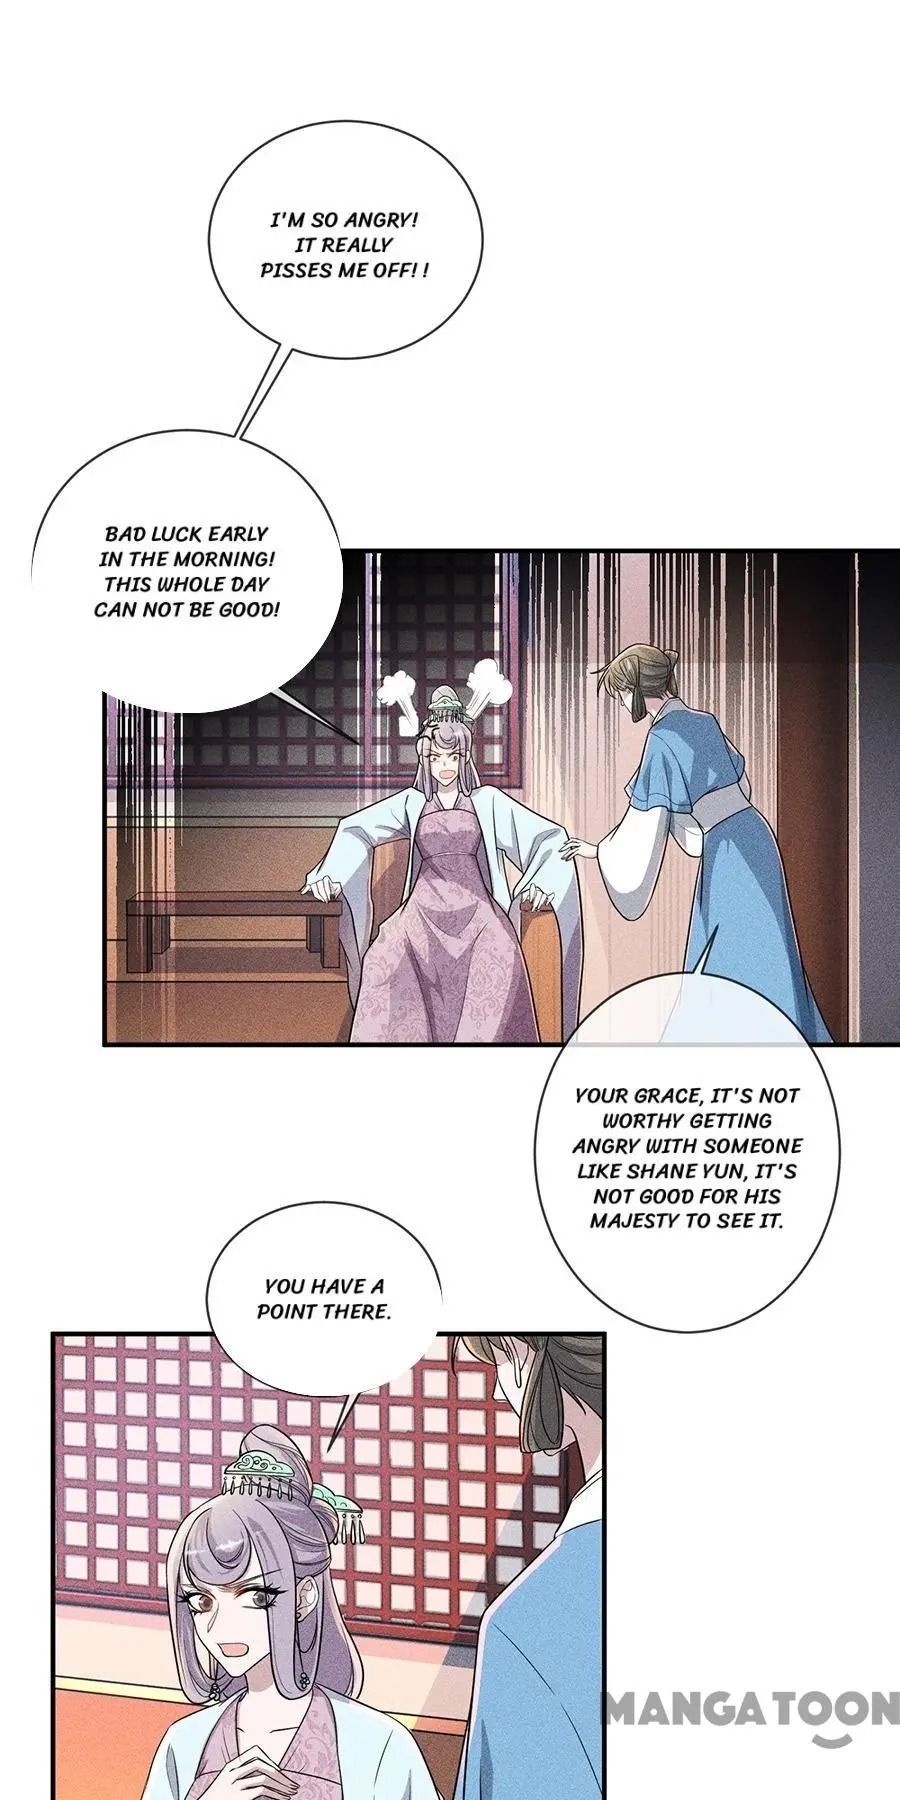 An One On One, Your Highness - Page 1